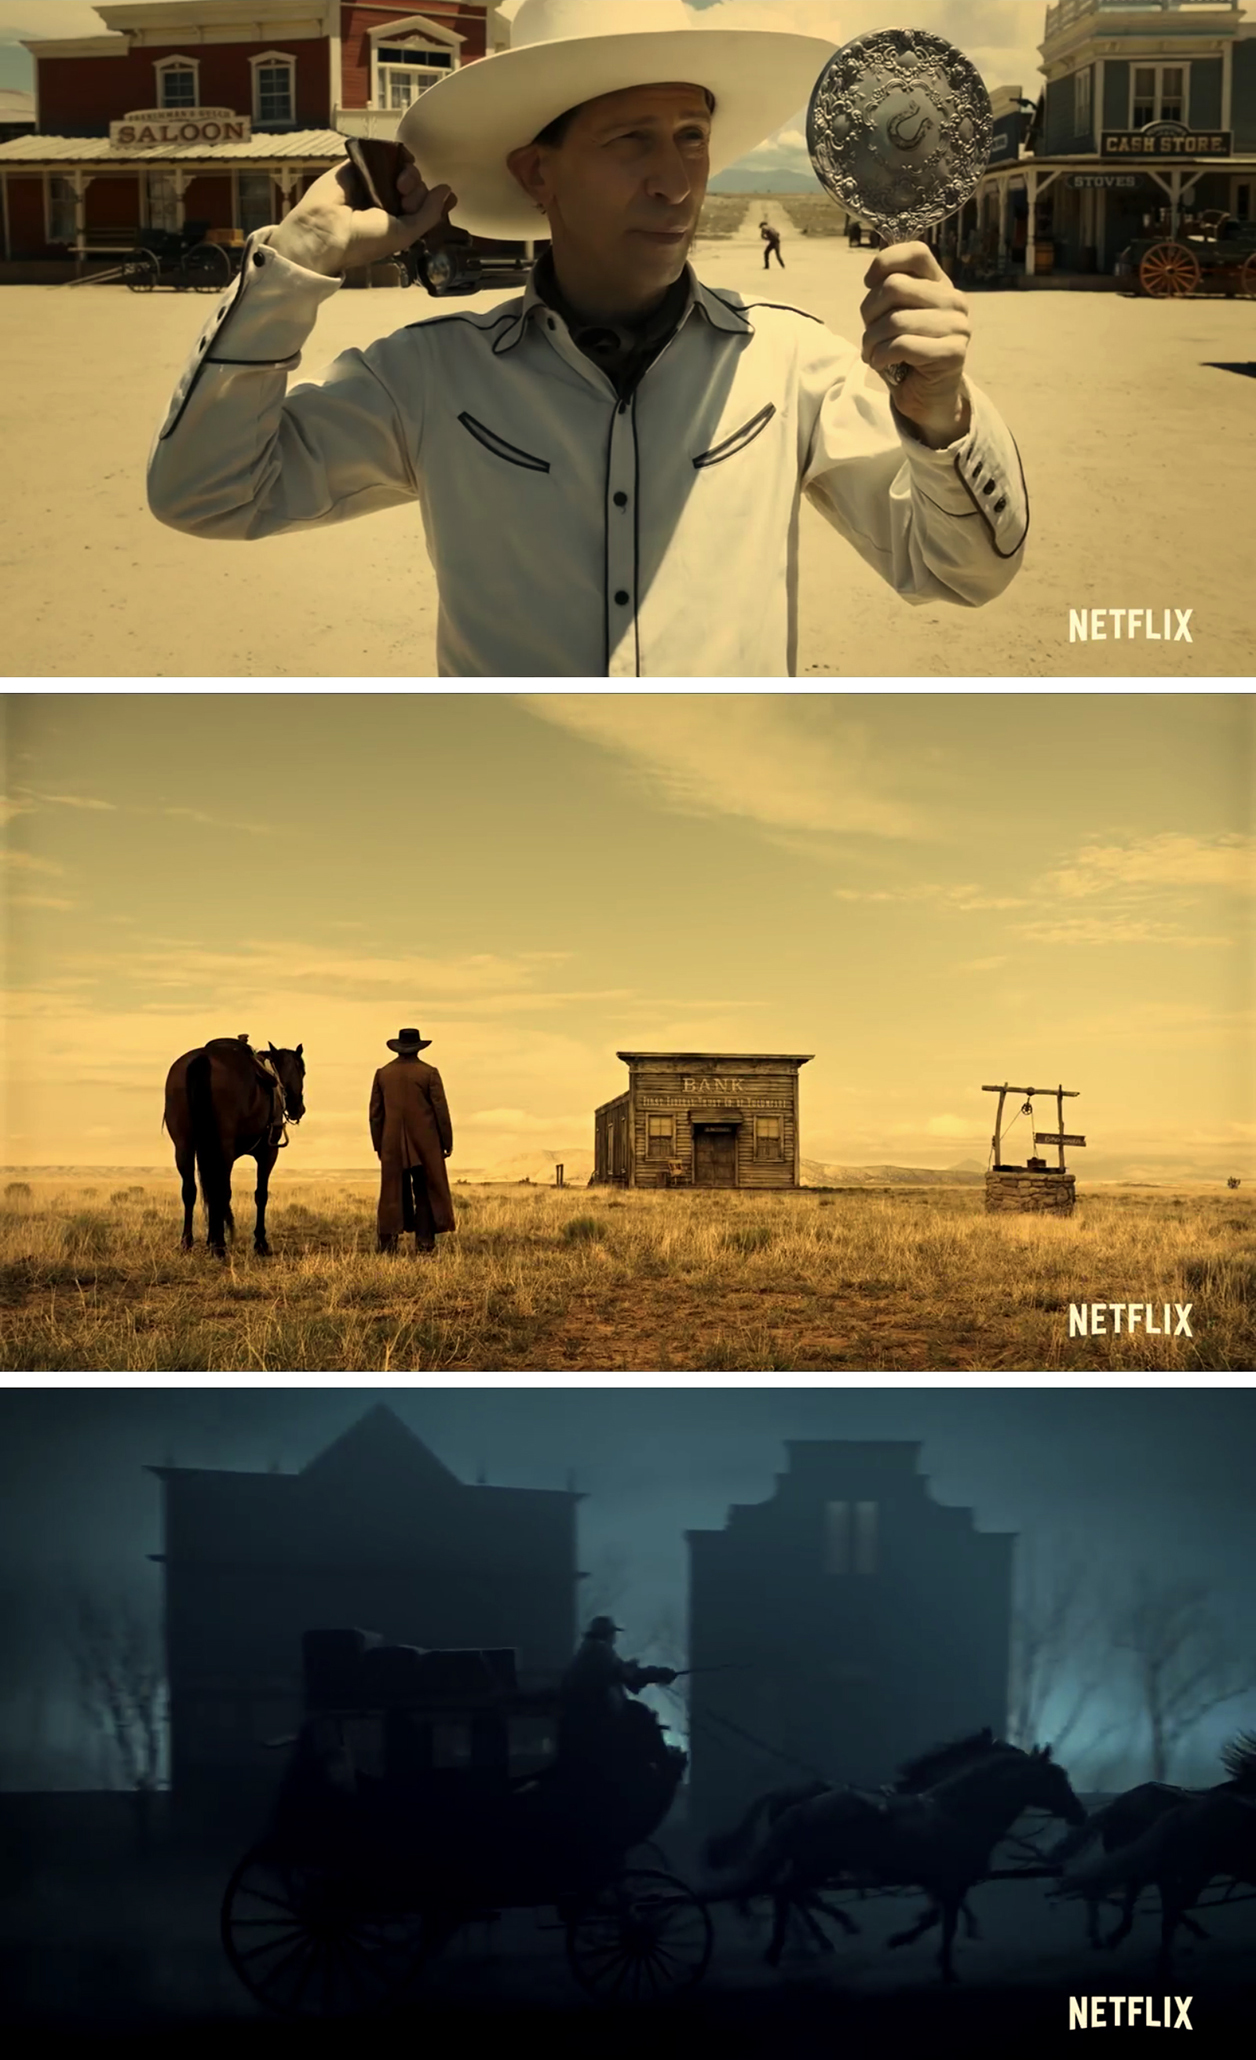 Buster Scruggs Painting Art Print the Ballad of Buster Scruggs 